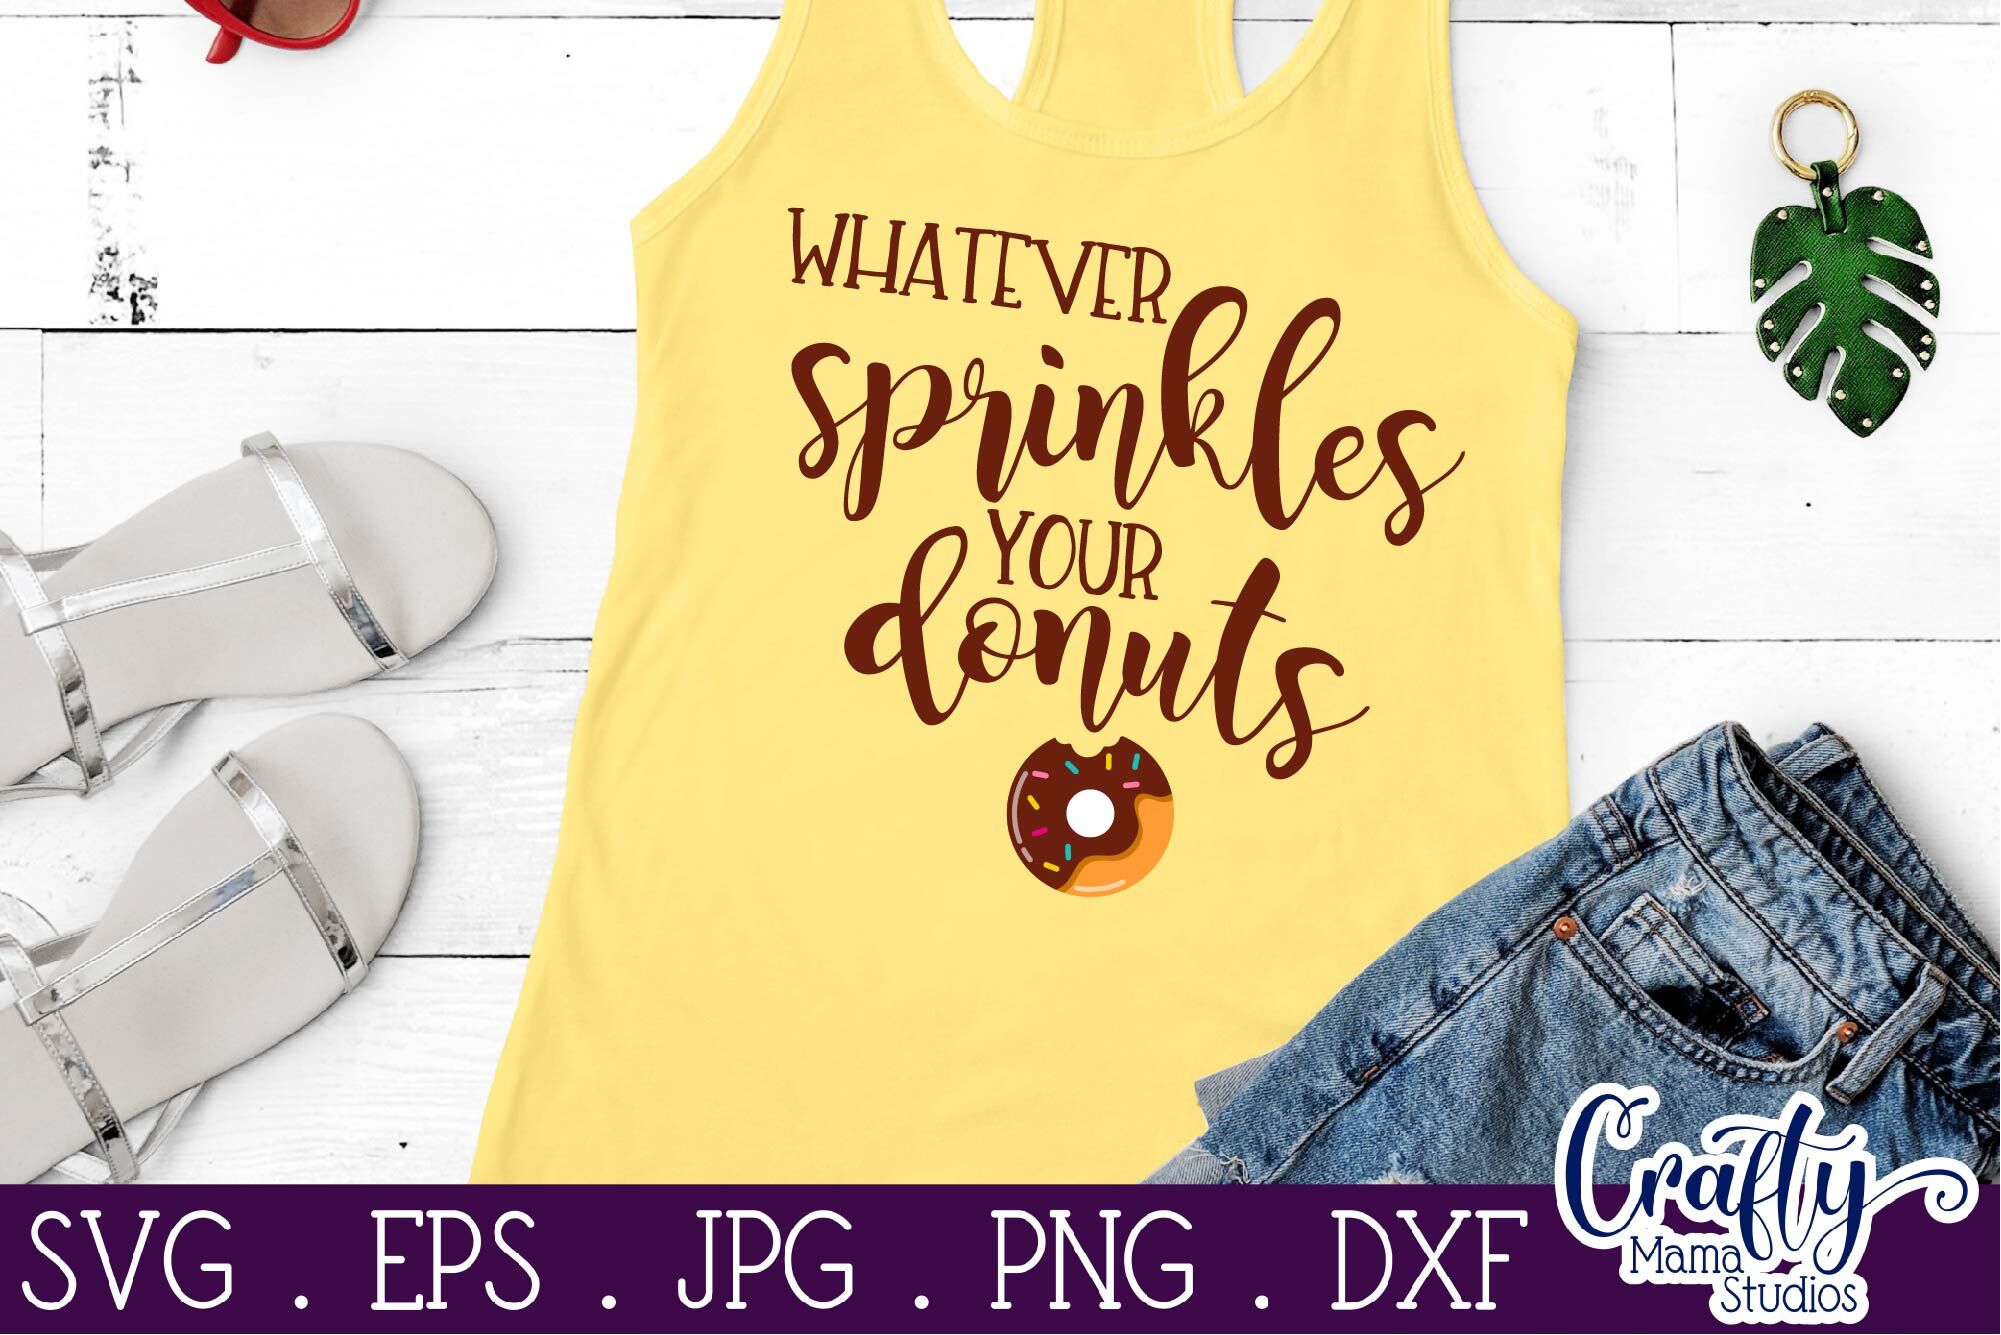 Download Donuts Svg Donut Svg Sarcastic Svg Whatever Sprinkles Your Donut By Crafty Mama Studios Thehungryjpeg Com